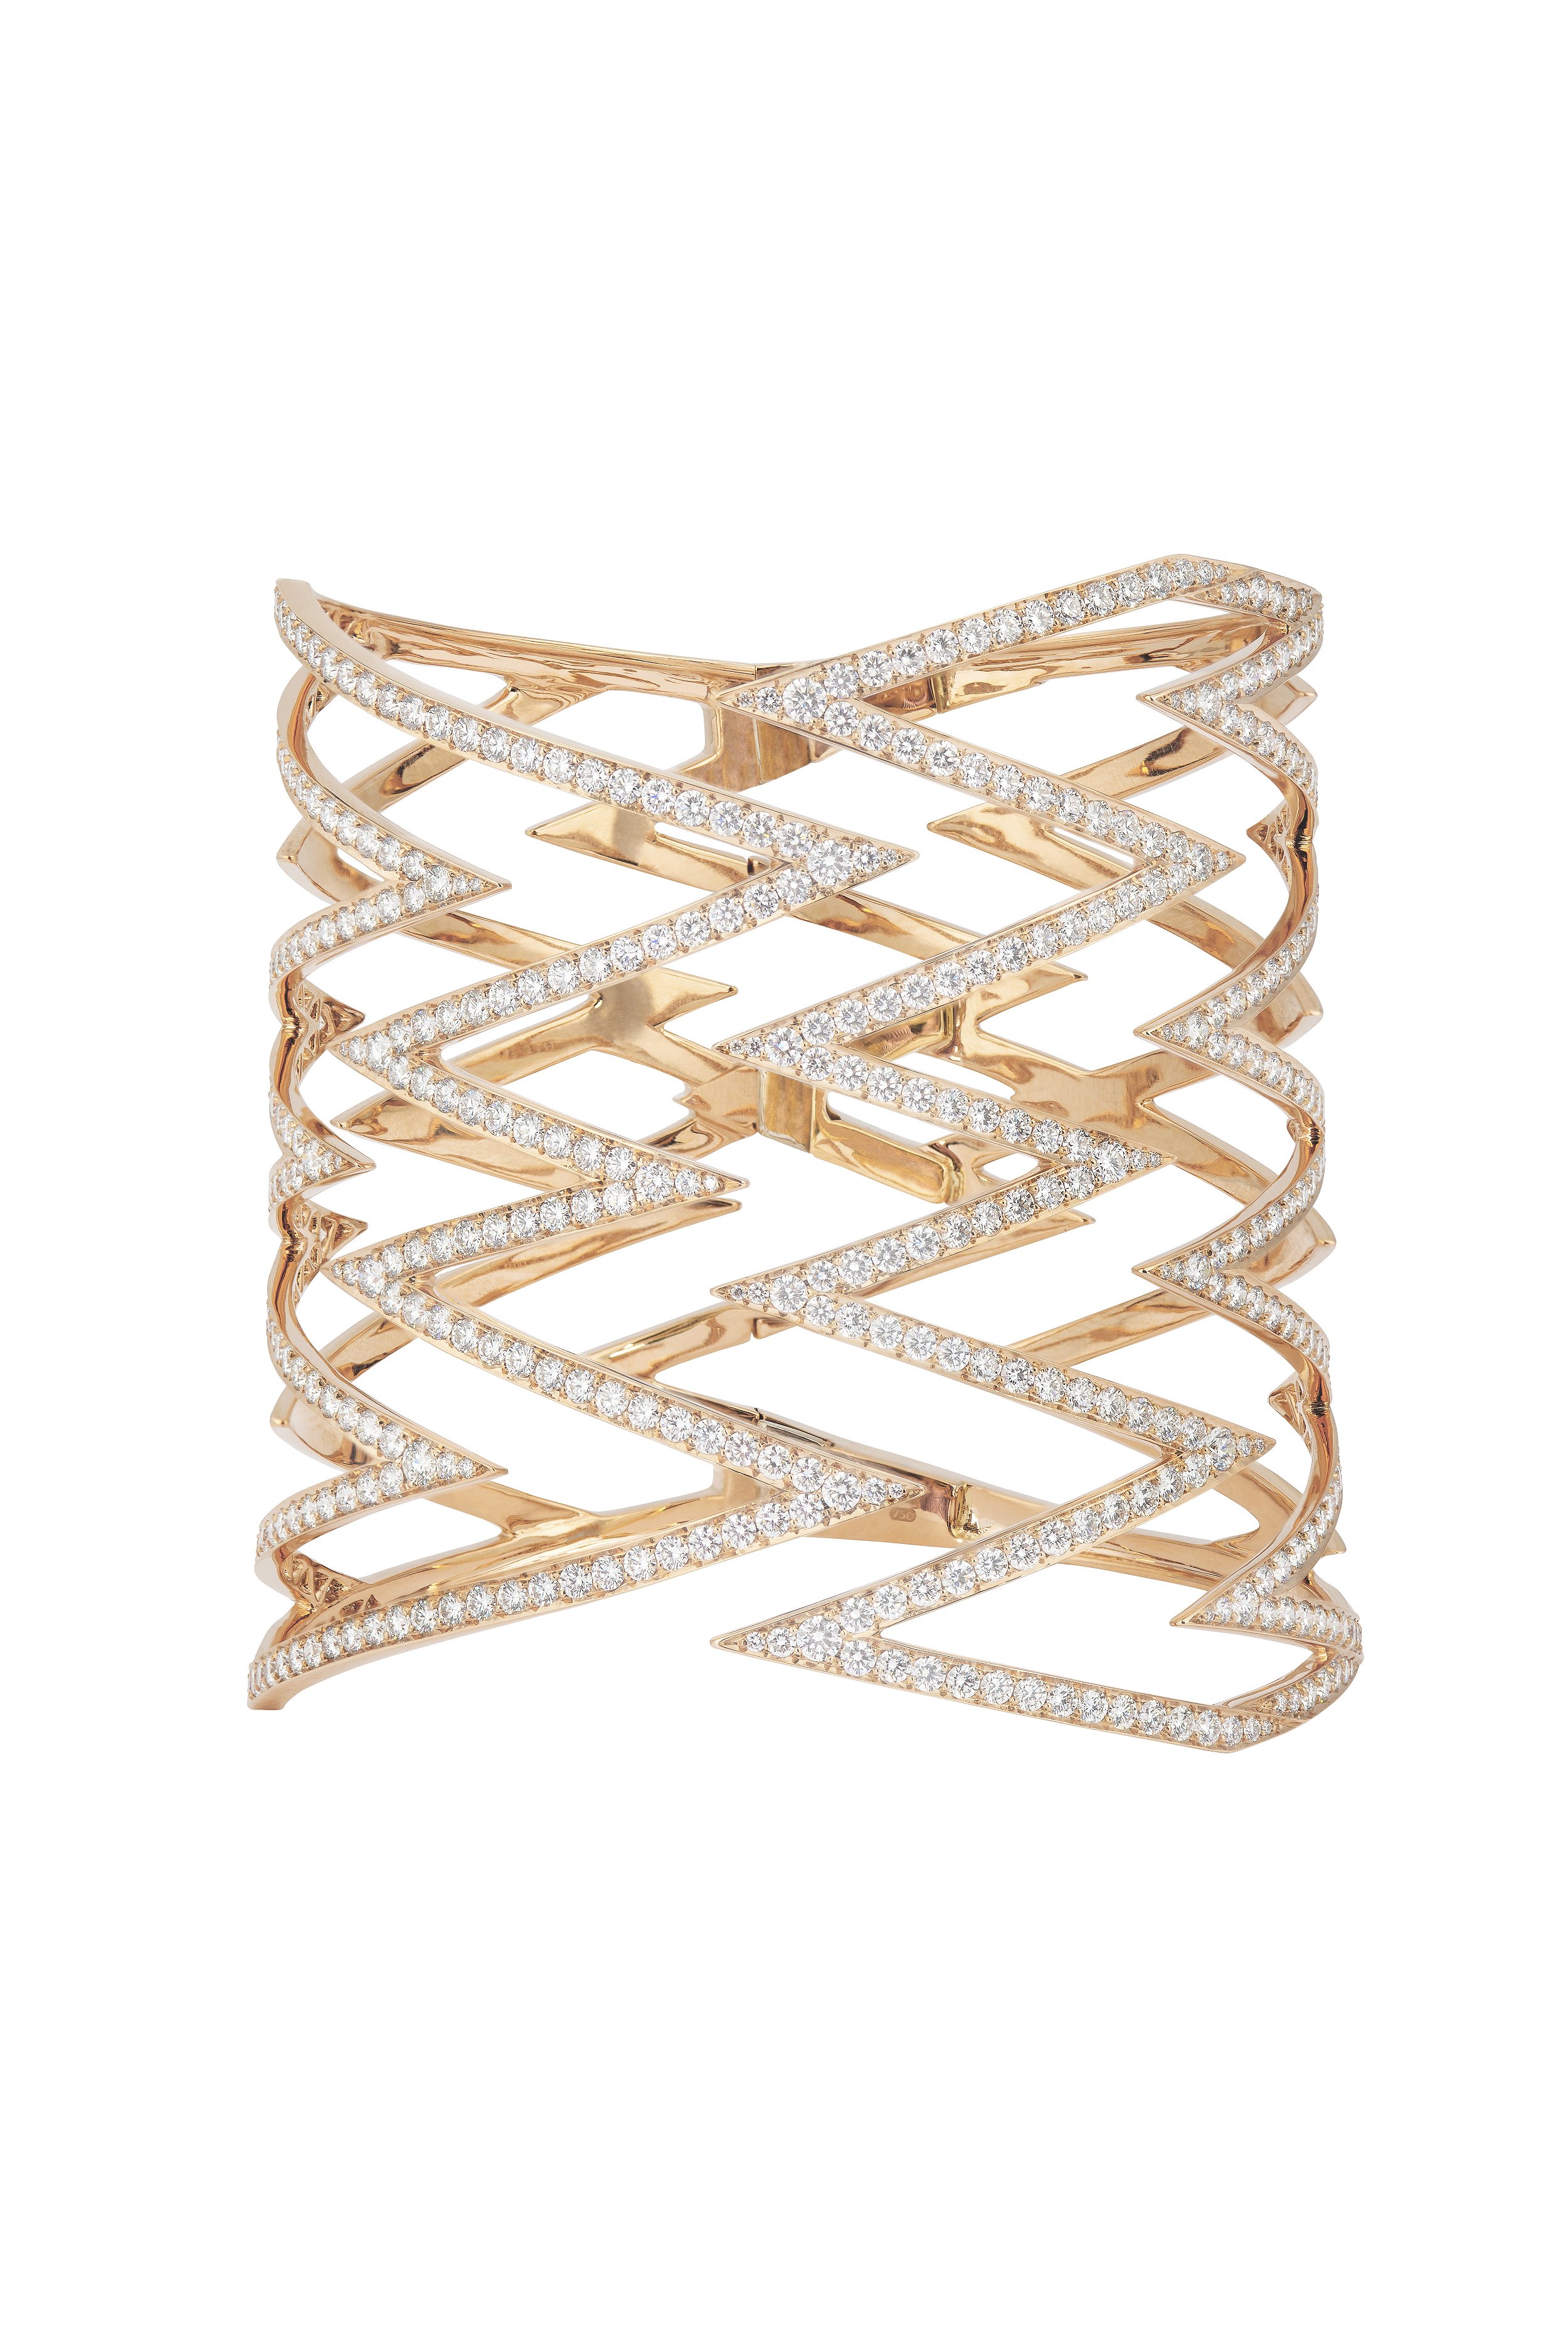 Lady Stardust Wide Cuff Bracelet with White Diamonds in 18kt Rose Gold